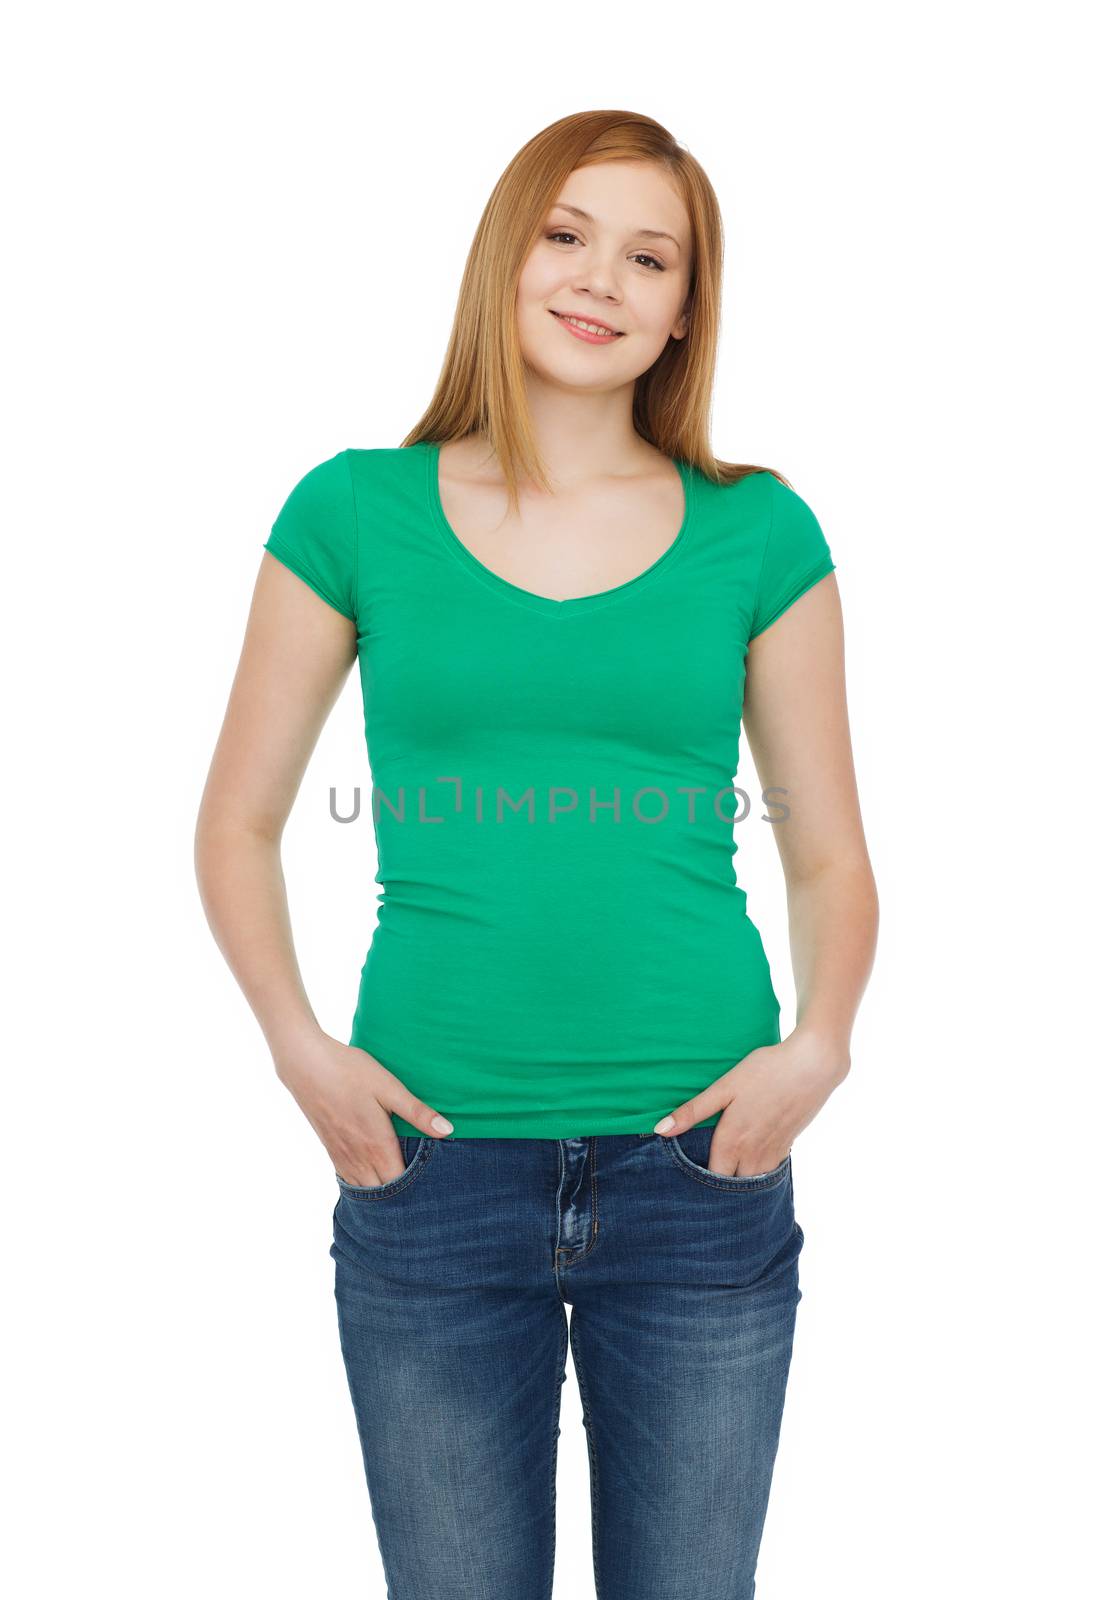 happiness and people concept - smiling teenage girl in casual clothes